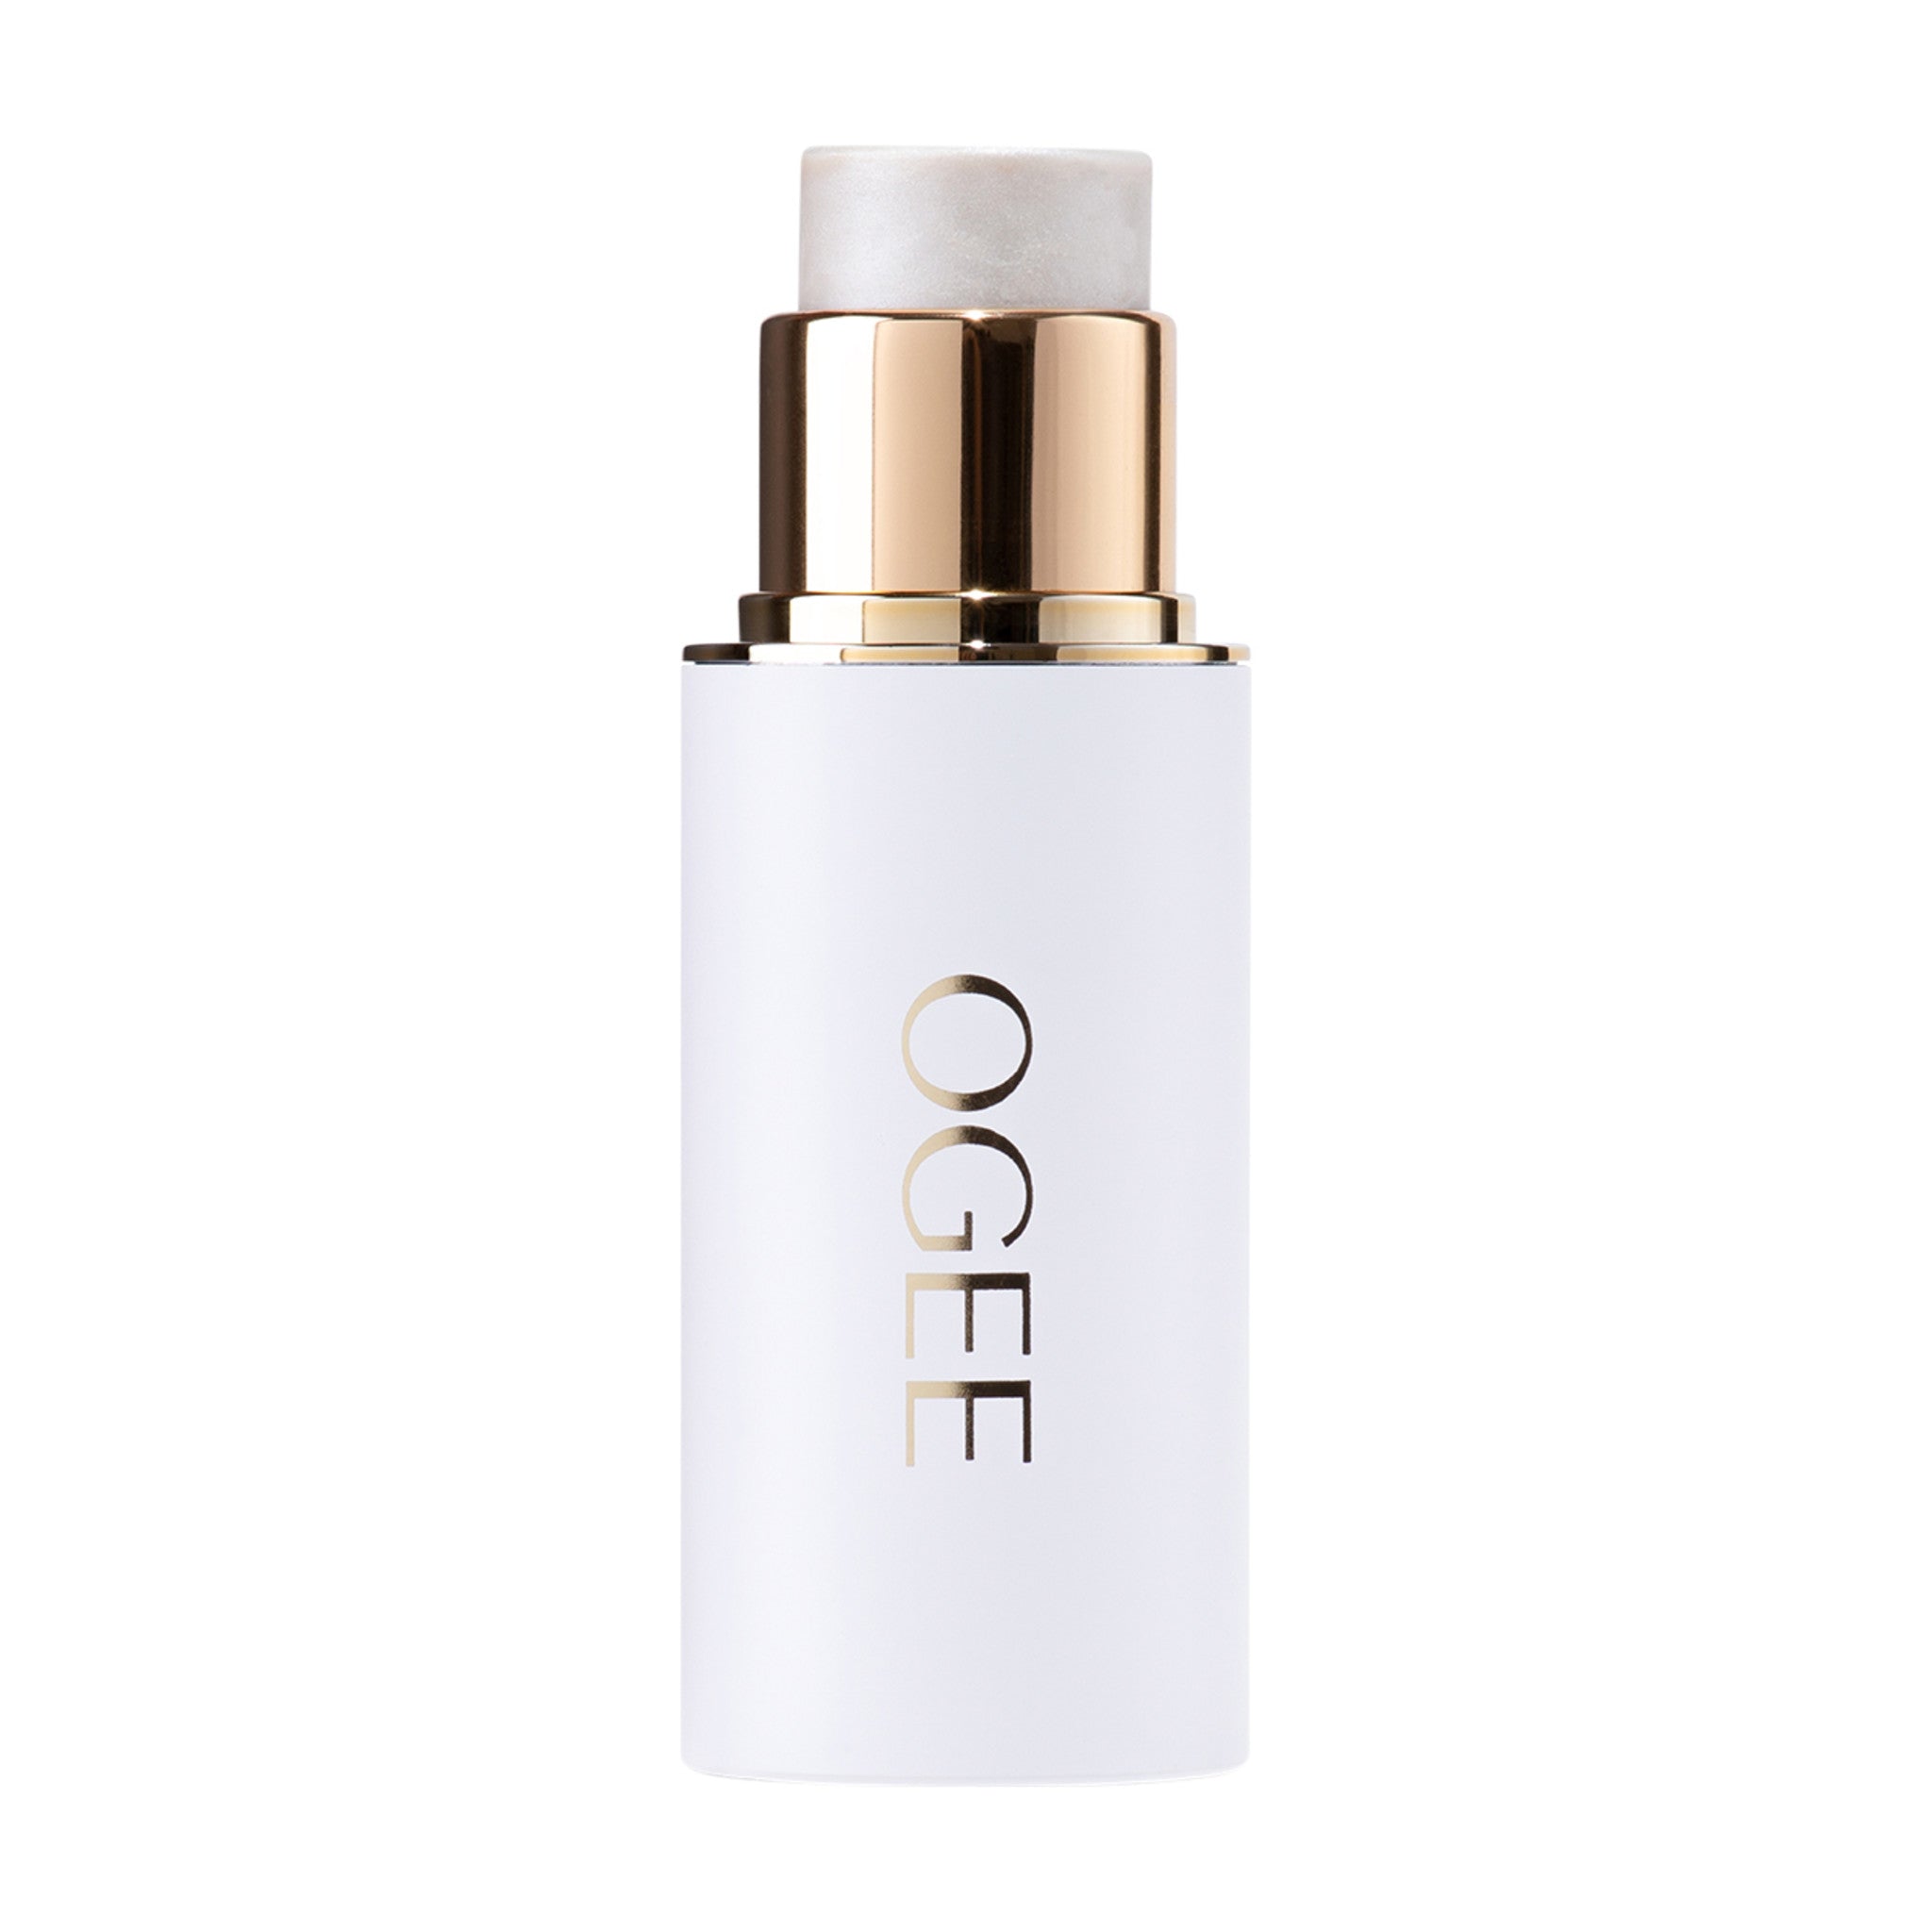 Ogee Sculpted Face Stick Color/Shade variant: Opal main image. This product is in the color white